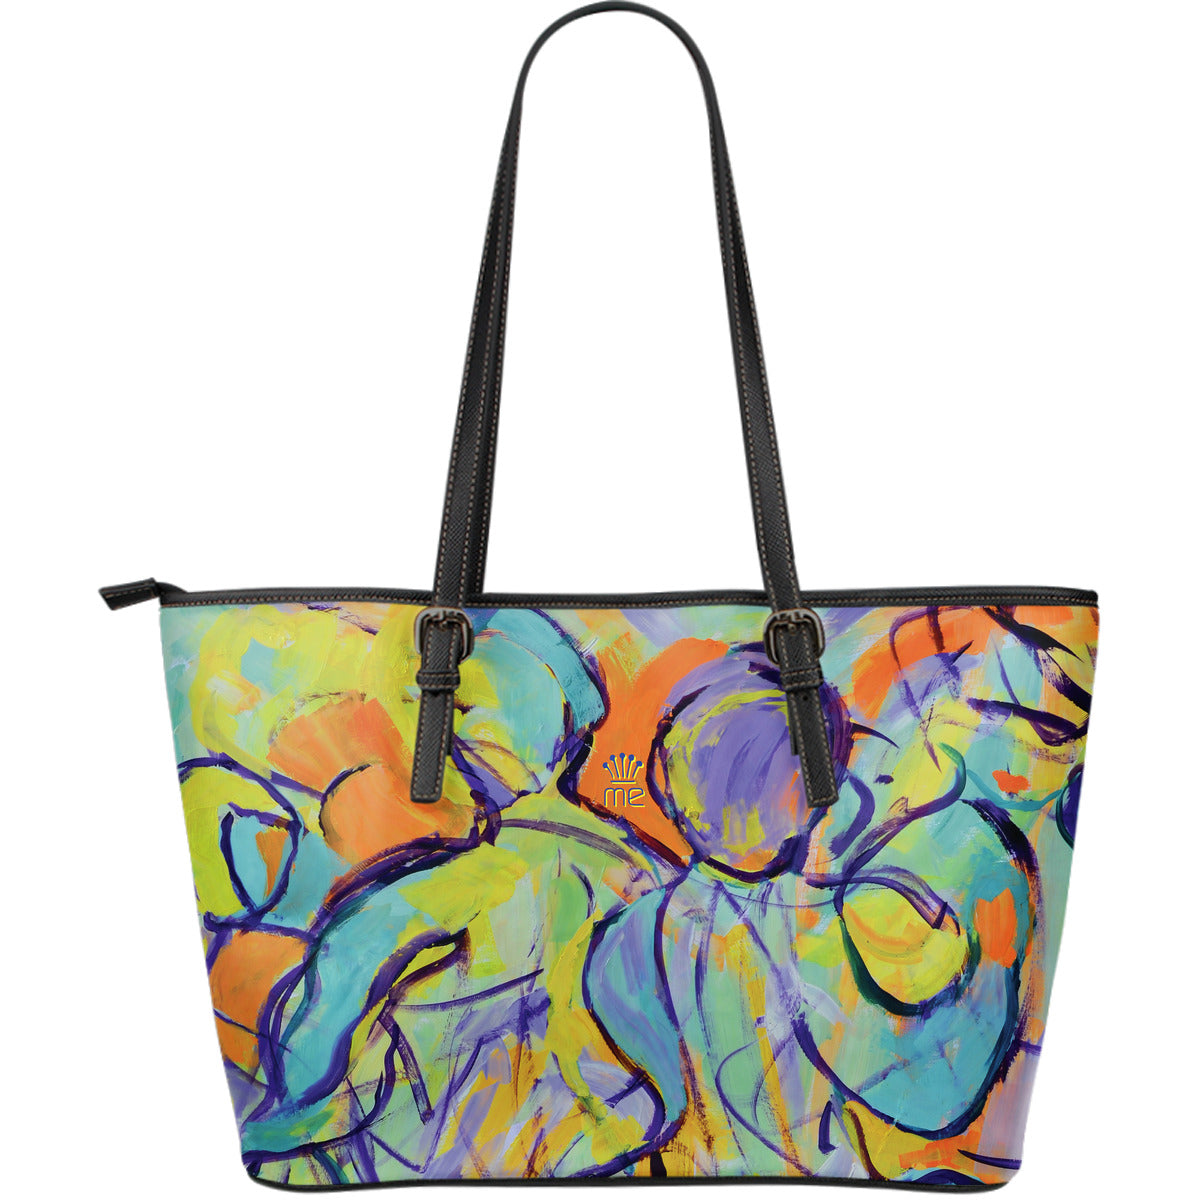 Colorful Tote Bag - JaZazzy 